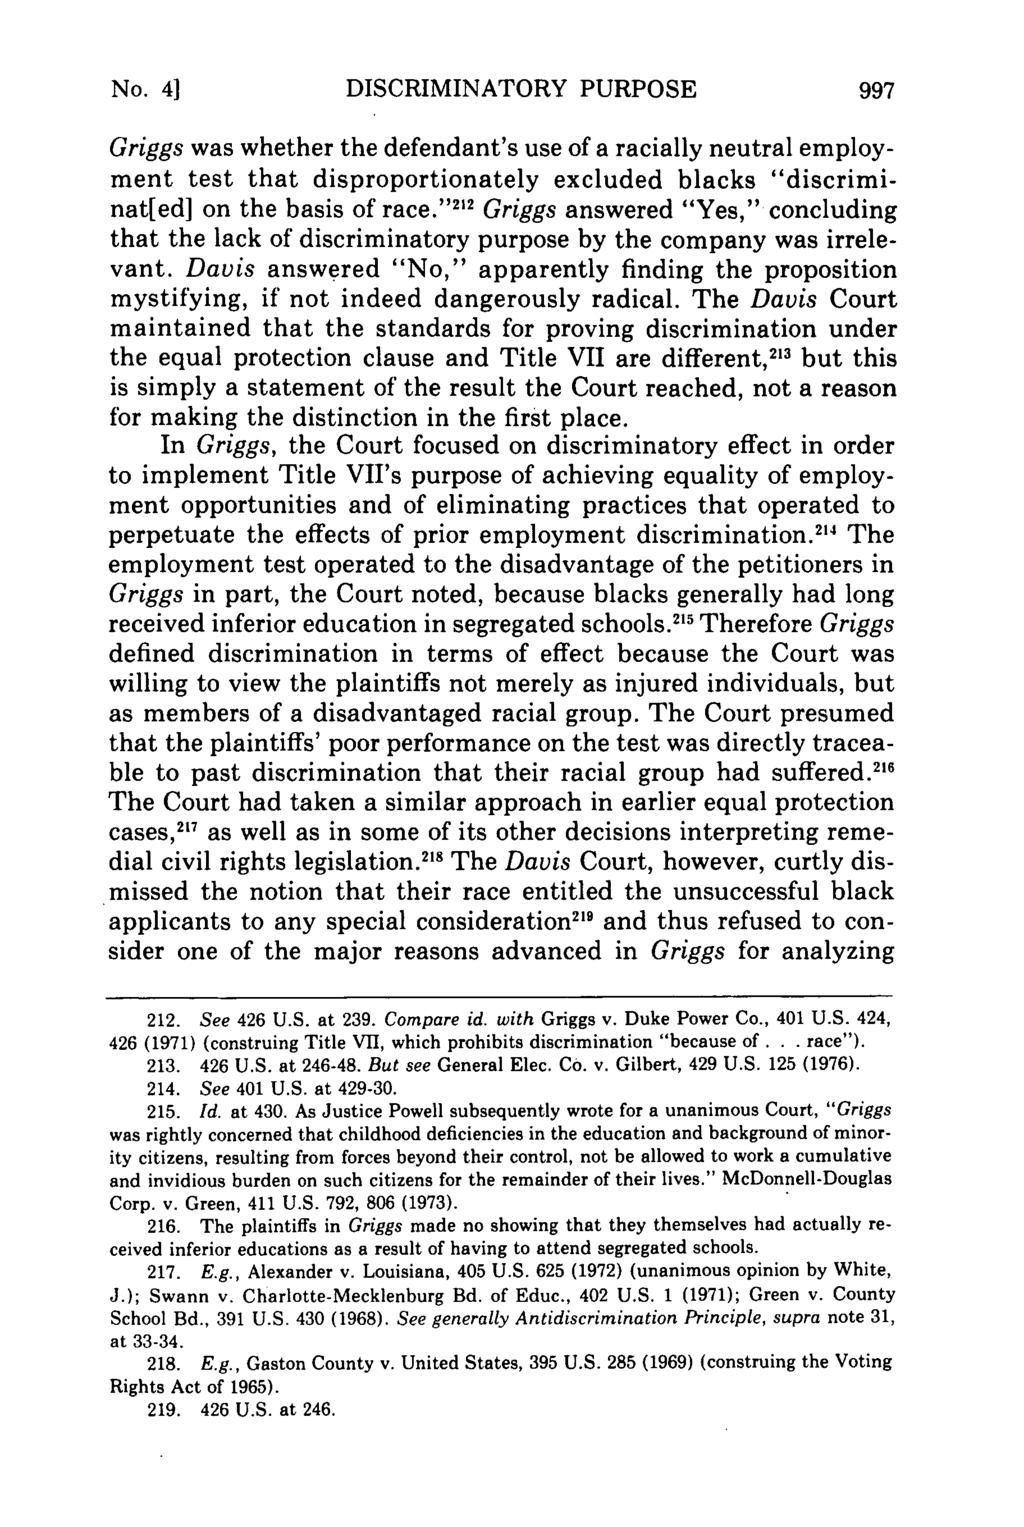 No. 4] DISCRIMINATORY PURPOSE Griggs was whether the defendant's use of a racially neutral employment test that disproportionately excluded blacks "discriminat[ed] on the basis of race.